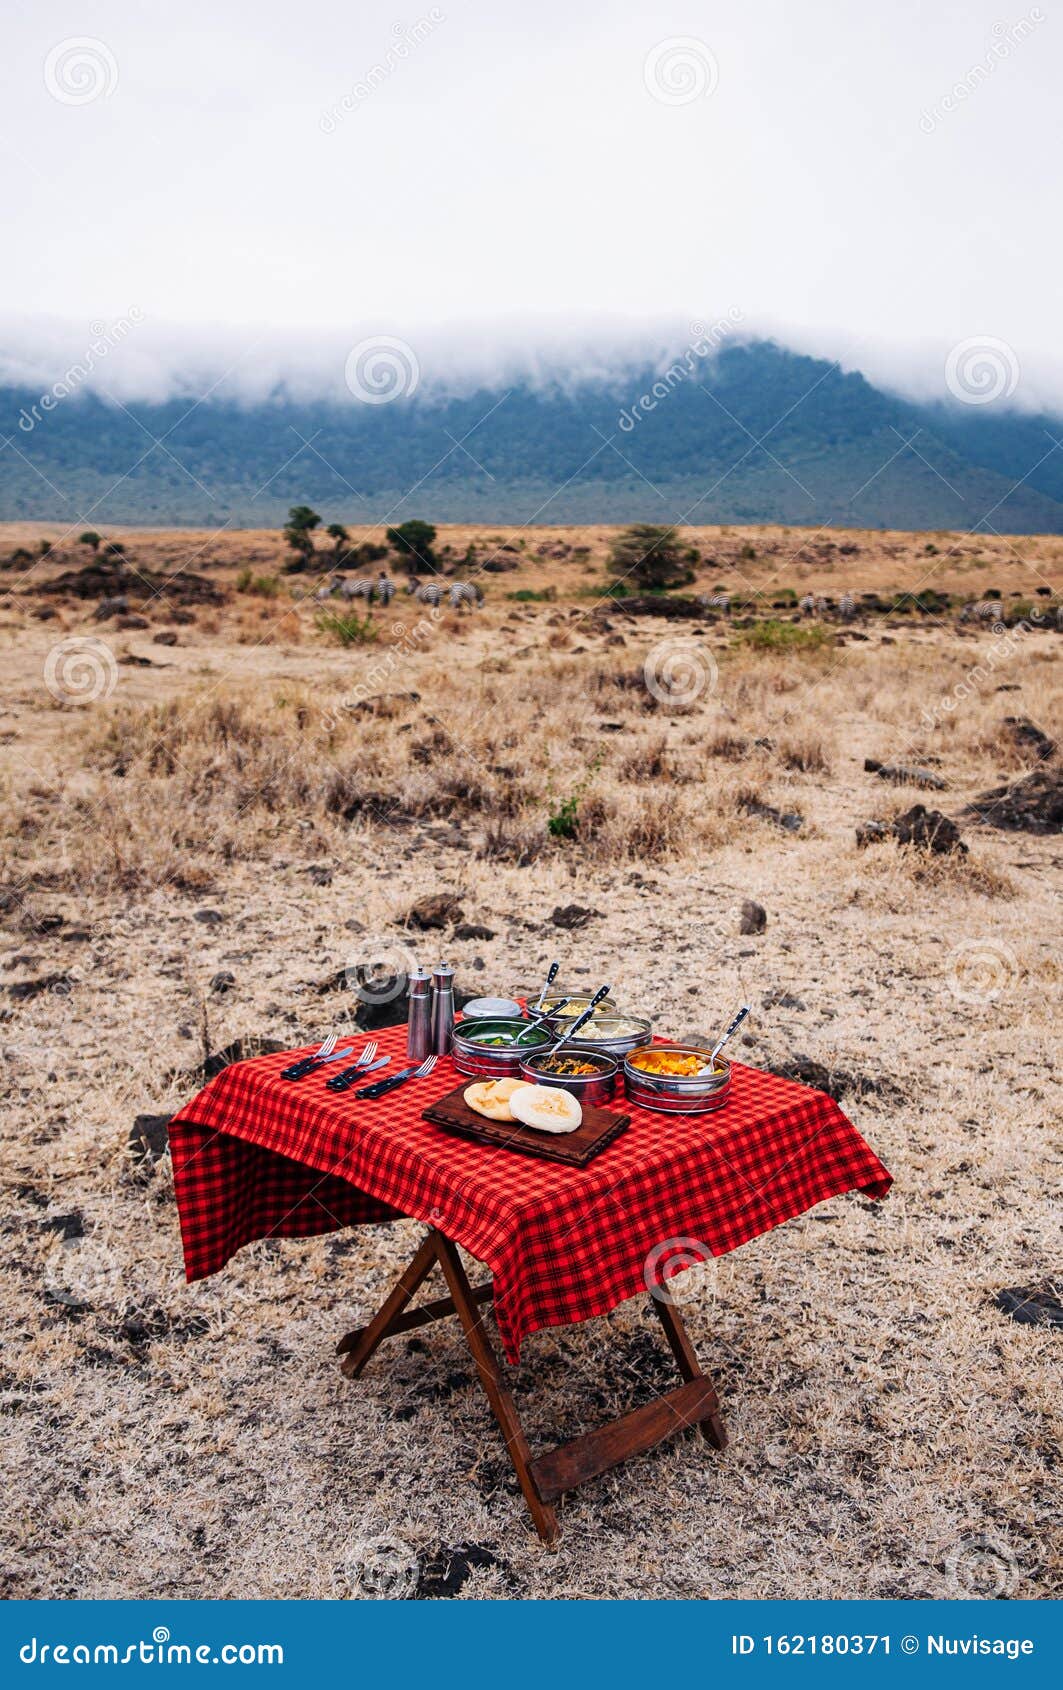 Safari Outdoor Picnic with African Tanzanian Cuisine with Baked Chapati ...